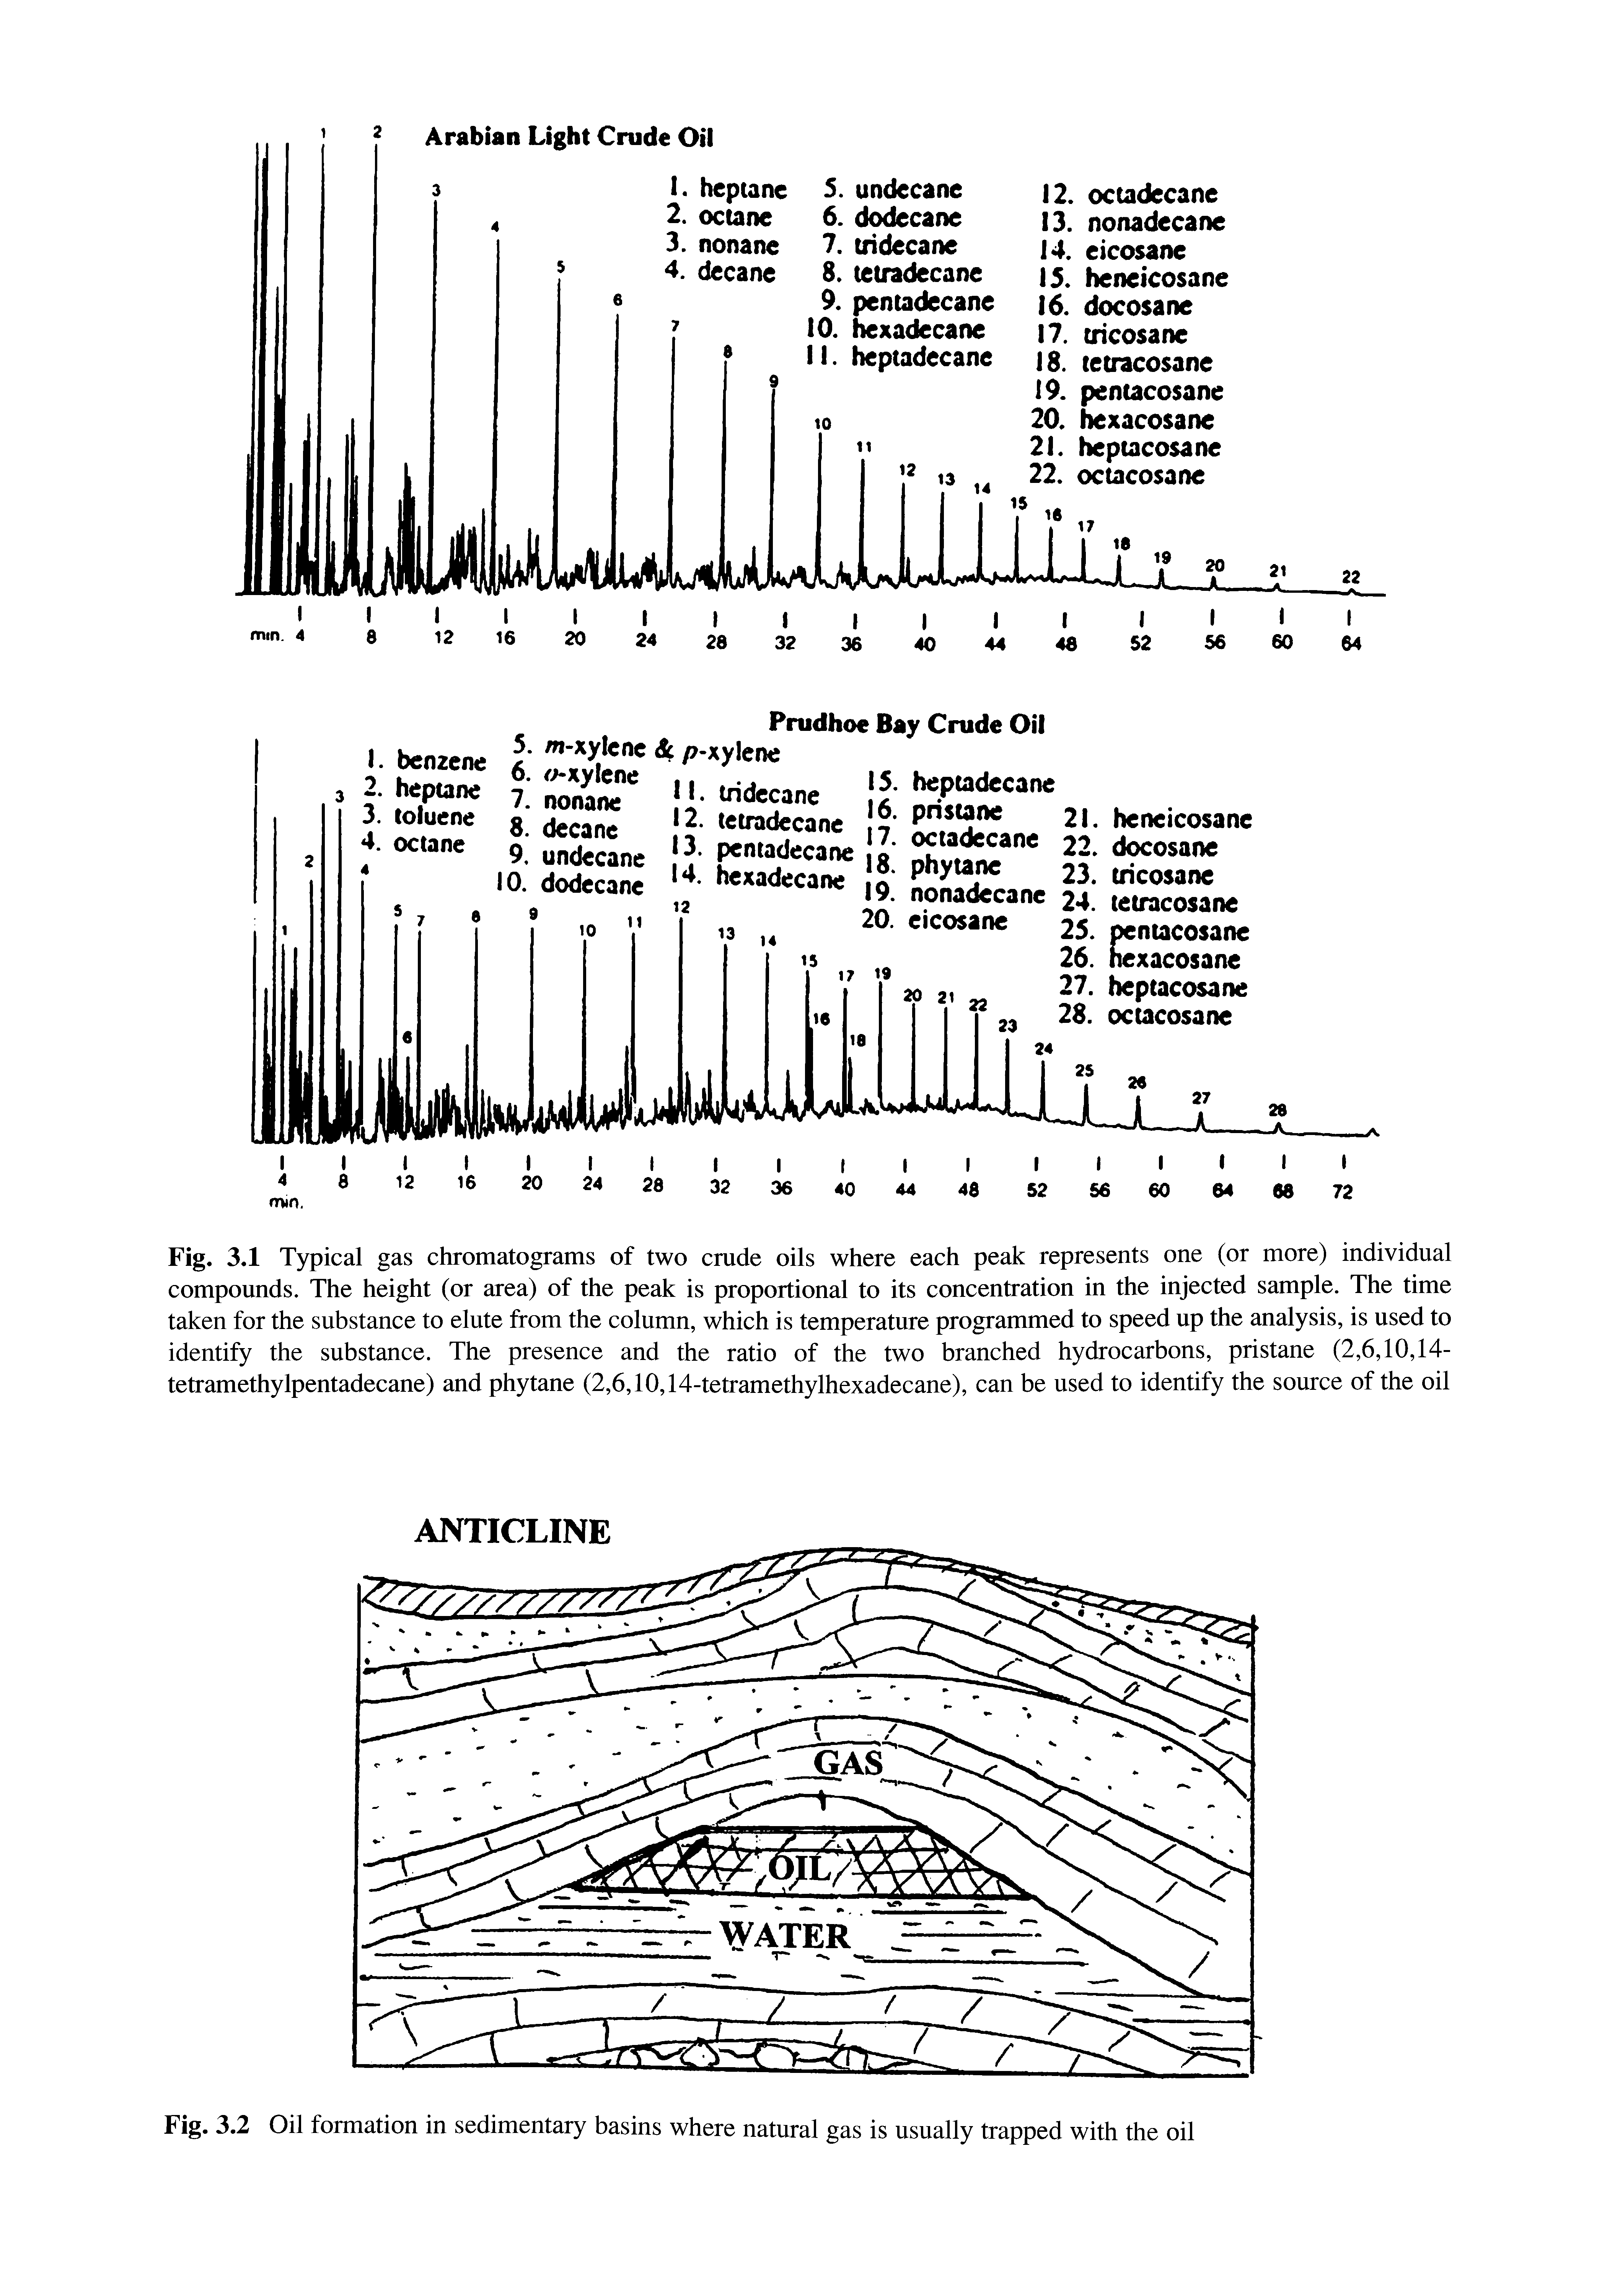 Fig. 3.1 Typical gas chromatograms of two crude oils where each peak represents one (or more) individual compounds. The height (or area) of the peak is proportional to its concentration in the injected sample. The time taken for the substance to elute from the column, which is temperature programmed to speed up the analysis, is used to identify the substance. The presence and the ratio of the two branched hydrocarbons, pristane (2,6,10,14-tetramethylpentadecane) and phytane (2,6,10,14-tetramethylhexadecane), can be used to identify the source of the oil...